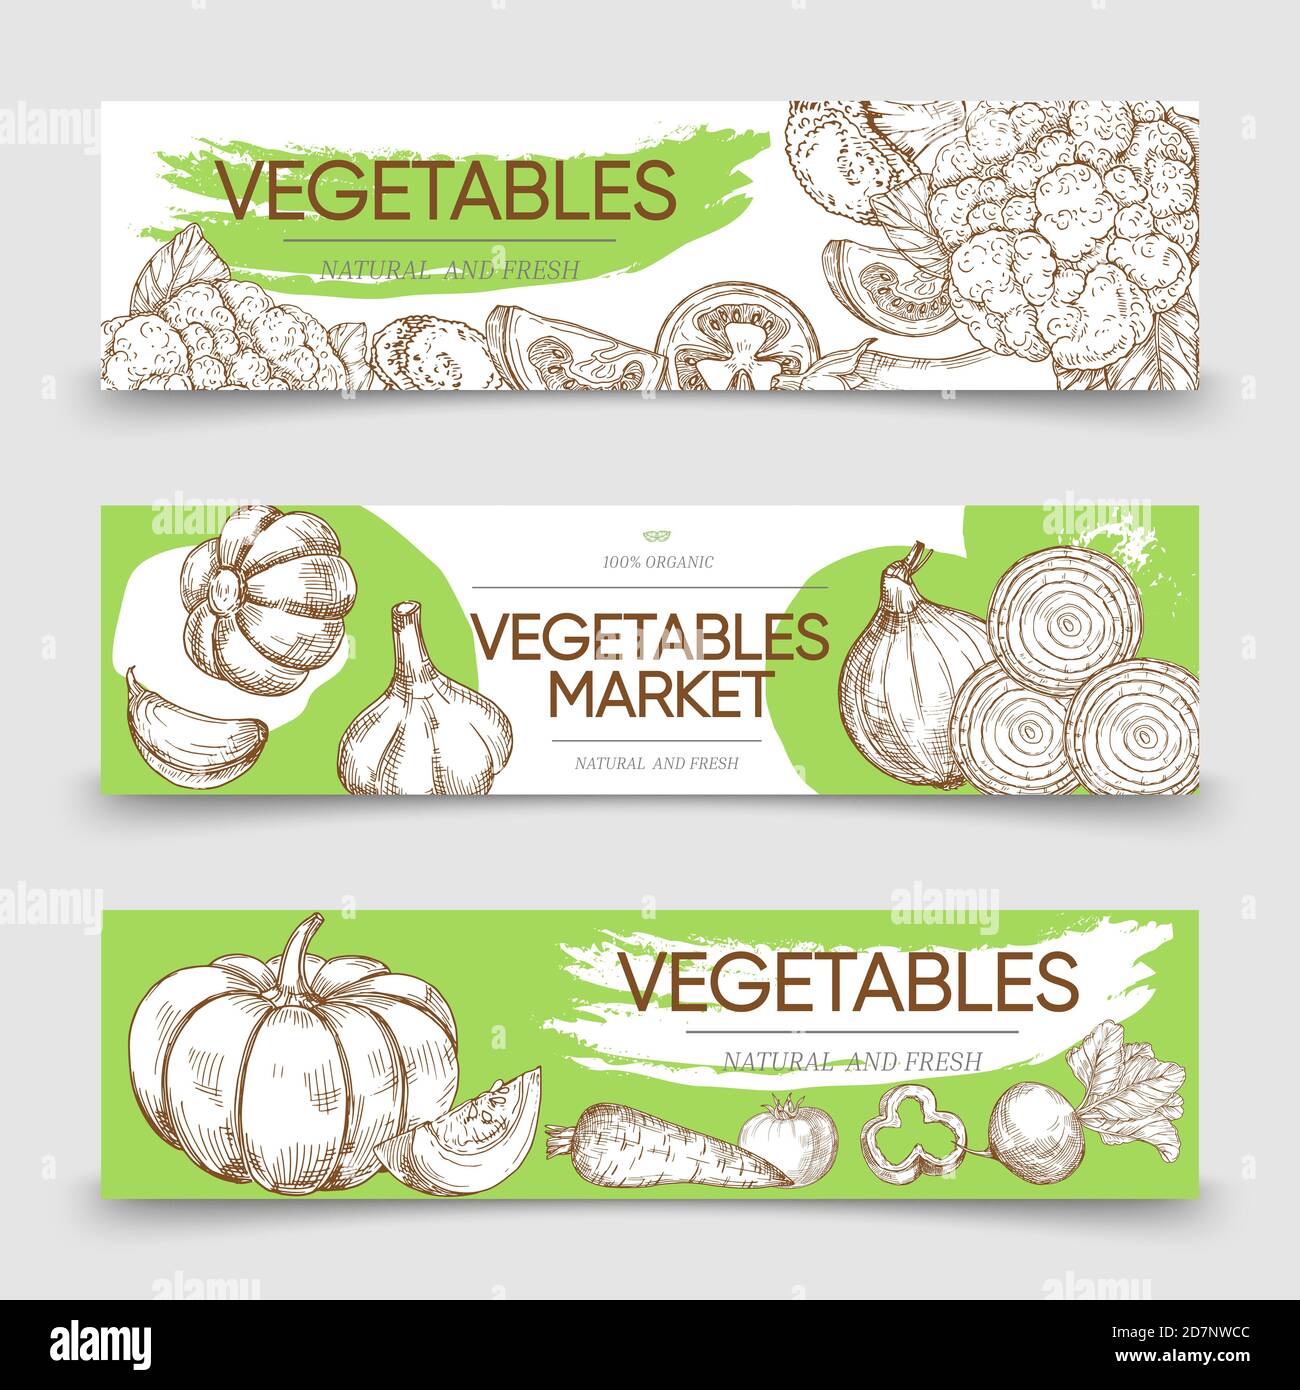 Vegetable markets horizontal banners template with vector sketch vegetables. Web banner with vegetable market, onion and cabbage illustration Stock Vector